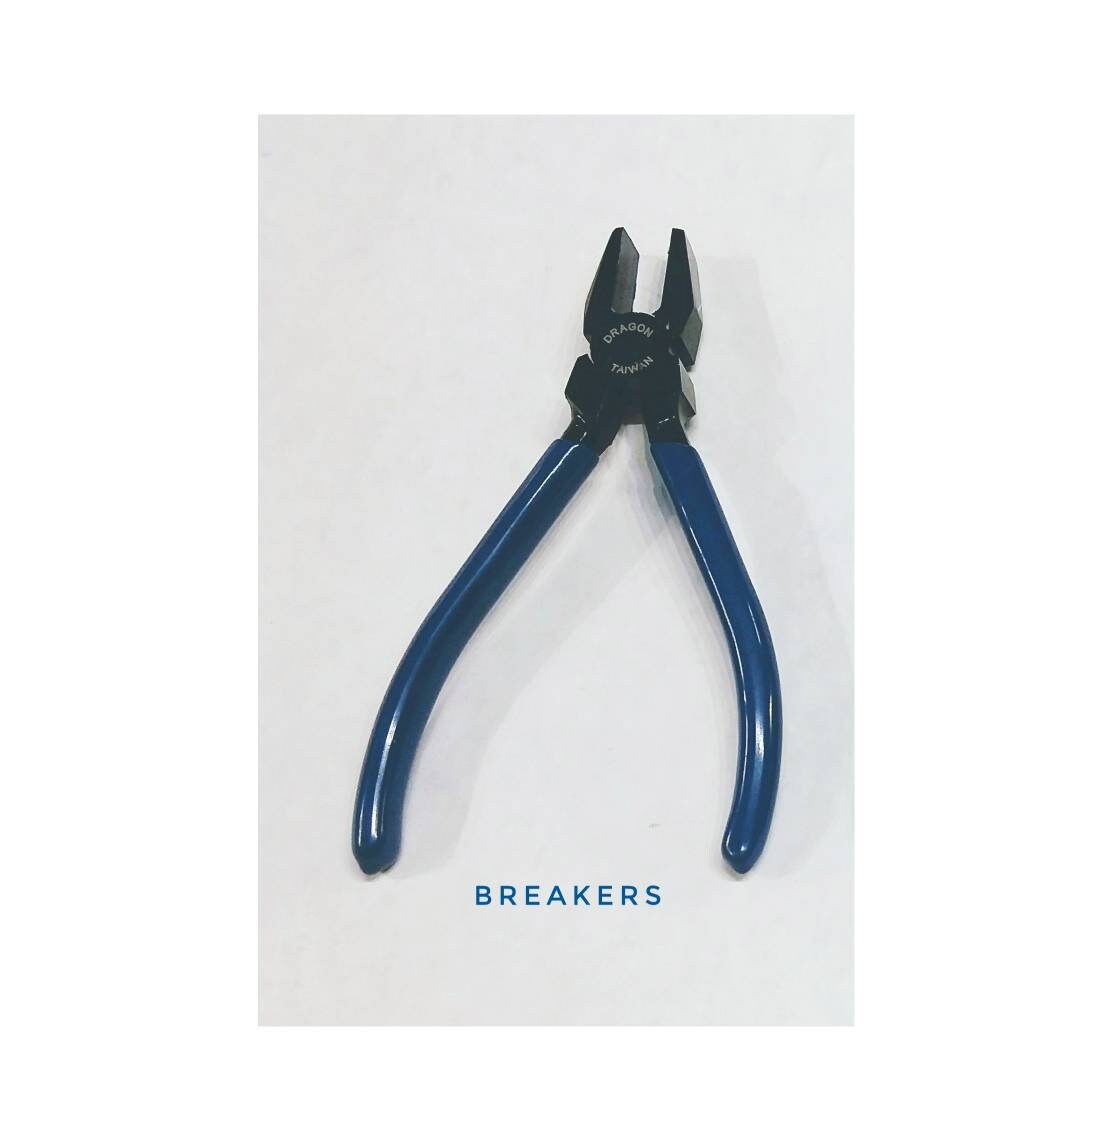 Stained Glass Pliers, for breaking glass along score. Sturdy metal with blue coated handles. Free shipping.